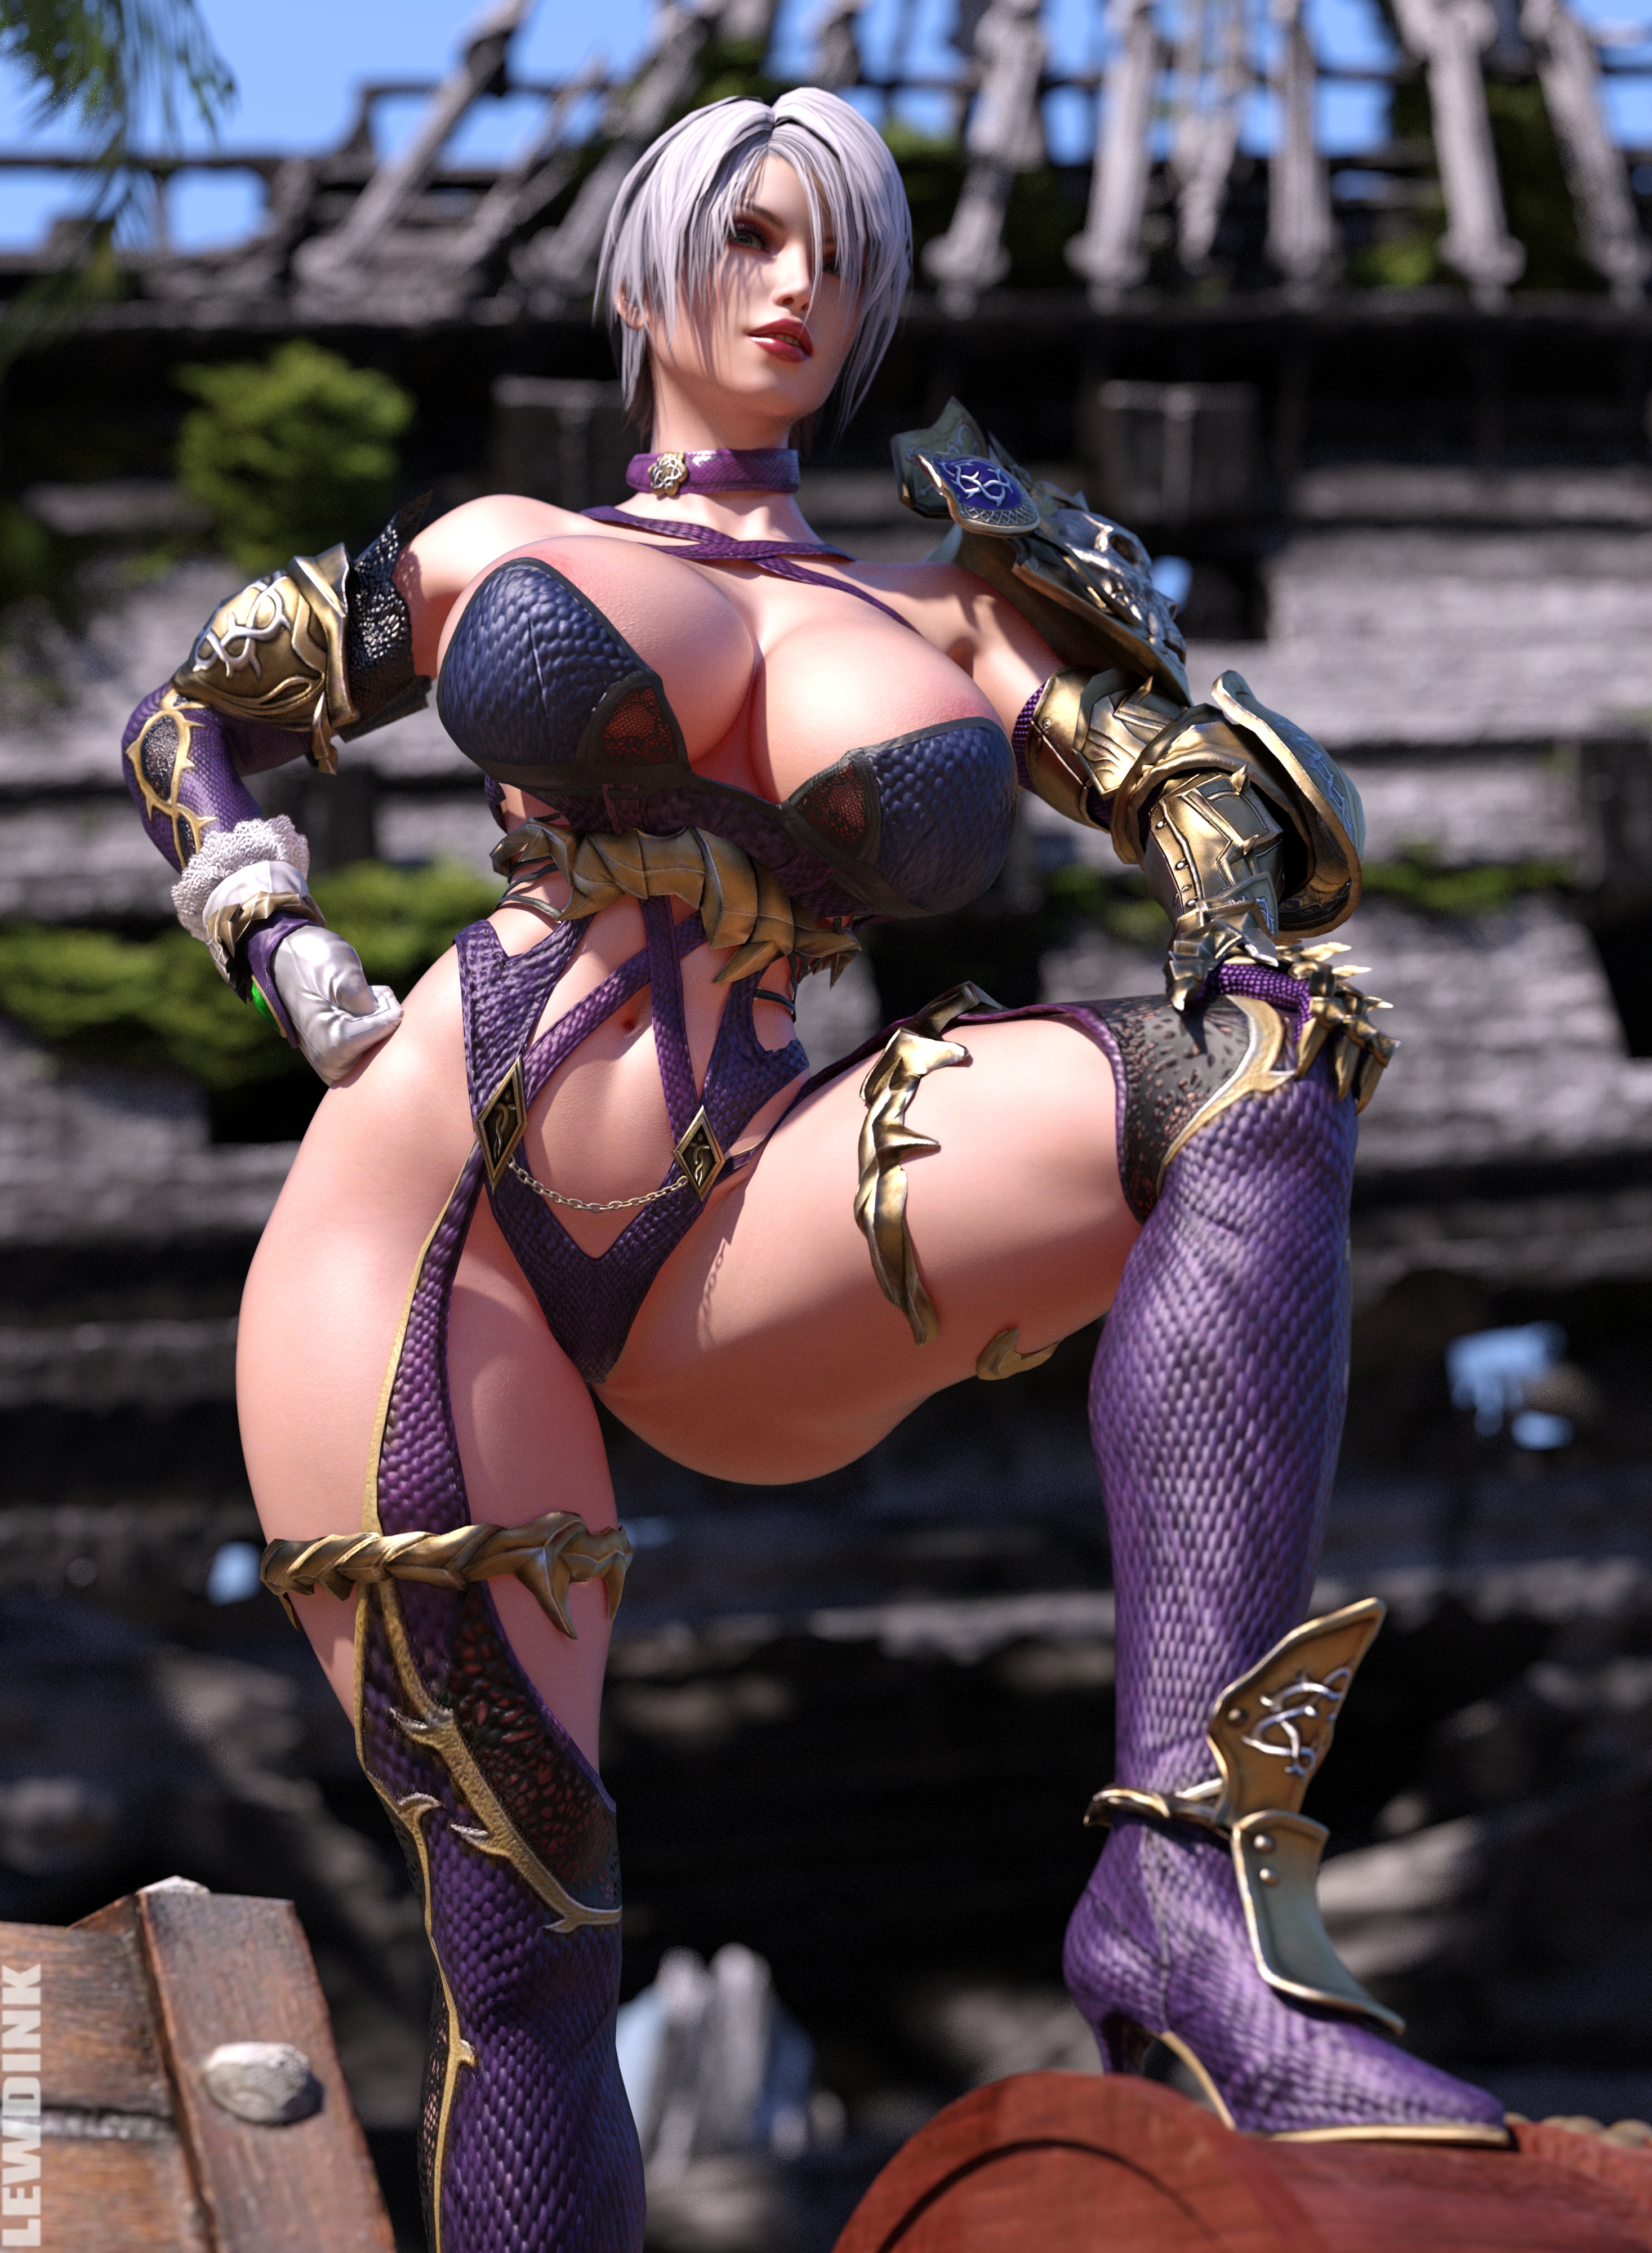 Ivy - Victory Ivy Valentine Soul Calibur Muscular Girl 3d Porn 3d Girl 3dnsfw 3dxgirls Abs Sexy Hot Bimbo Huge Boobs Huge Tits Muscles Musclegirl Pinup Perfect Body Fuck Hard Sexyhot Sexy Ass Sexy Woman Fake Tits Lips Latex Flexible Smirking Big Tits Huge Ass Big Booty Booty Fit Fitness Leggings Thicc Mom Milf Mature Mature Woman Latina Spread Legs Spread Thick Thighs Horny Face Short Hair Hardcore Curvy Big Ass Big boobs Big Breasts Big Butt Eyepatch Eye Contact Brown Eyes Cleavage Fighter Fighting Bikini Sexy Bikini Leather Tattoo Tattoos Sexy Asian Domination Dominatrix Dominant Armor Bikini Armor Gold White Hair Silver Hair Pirate